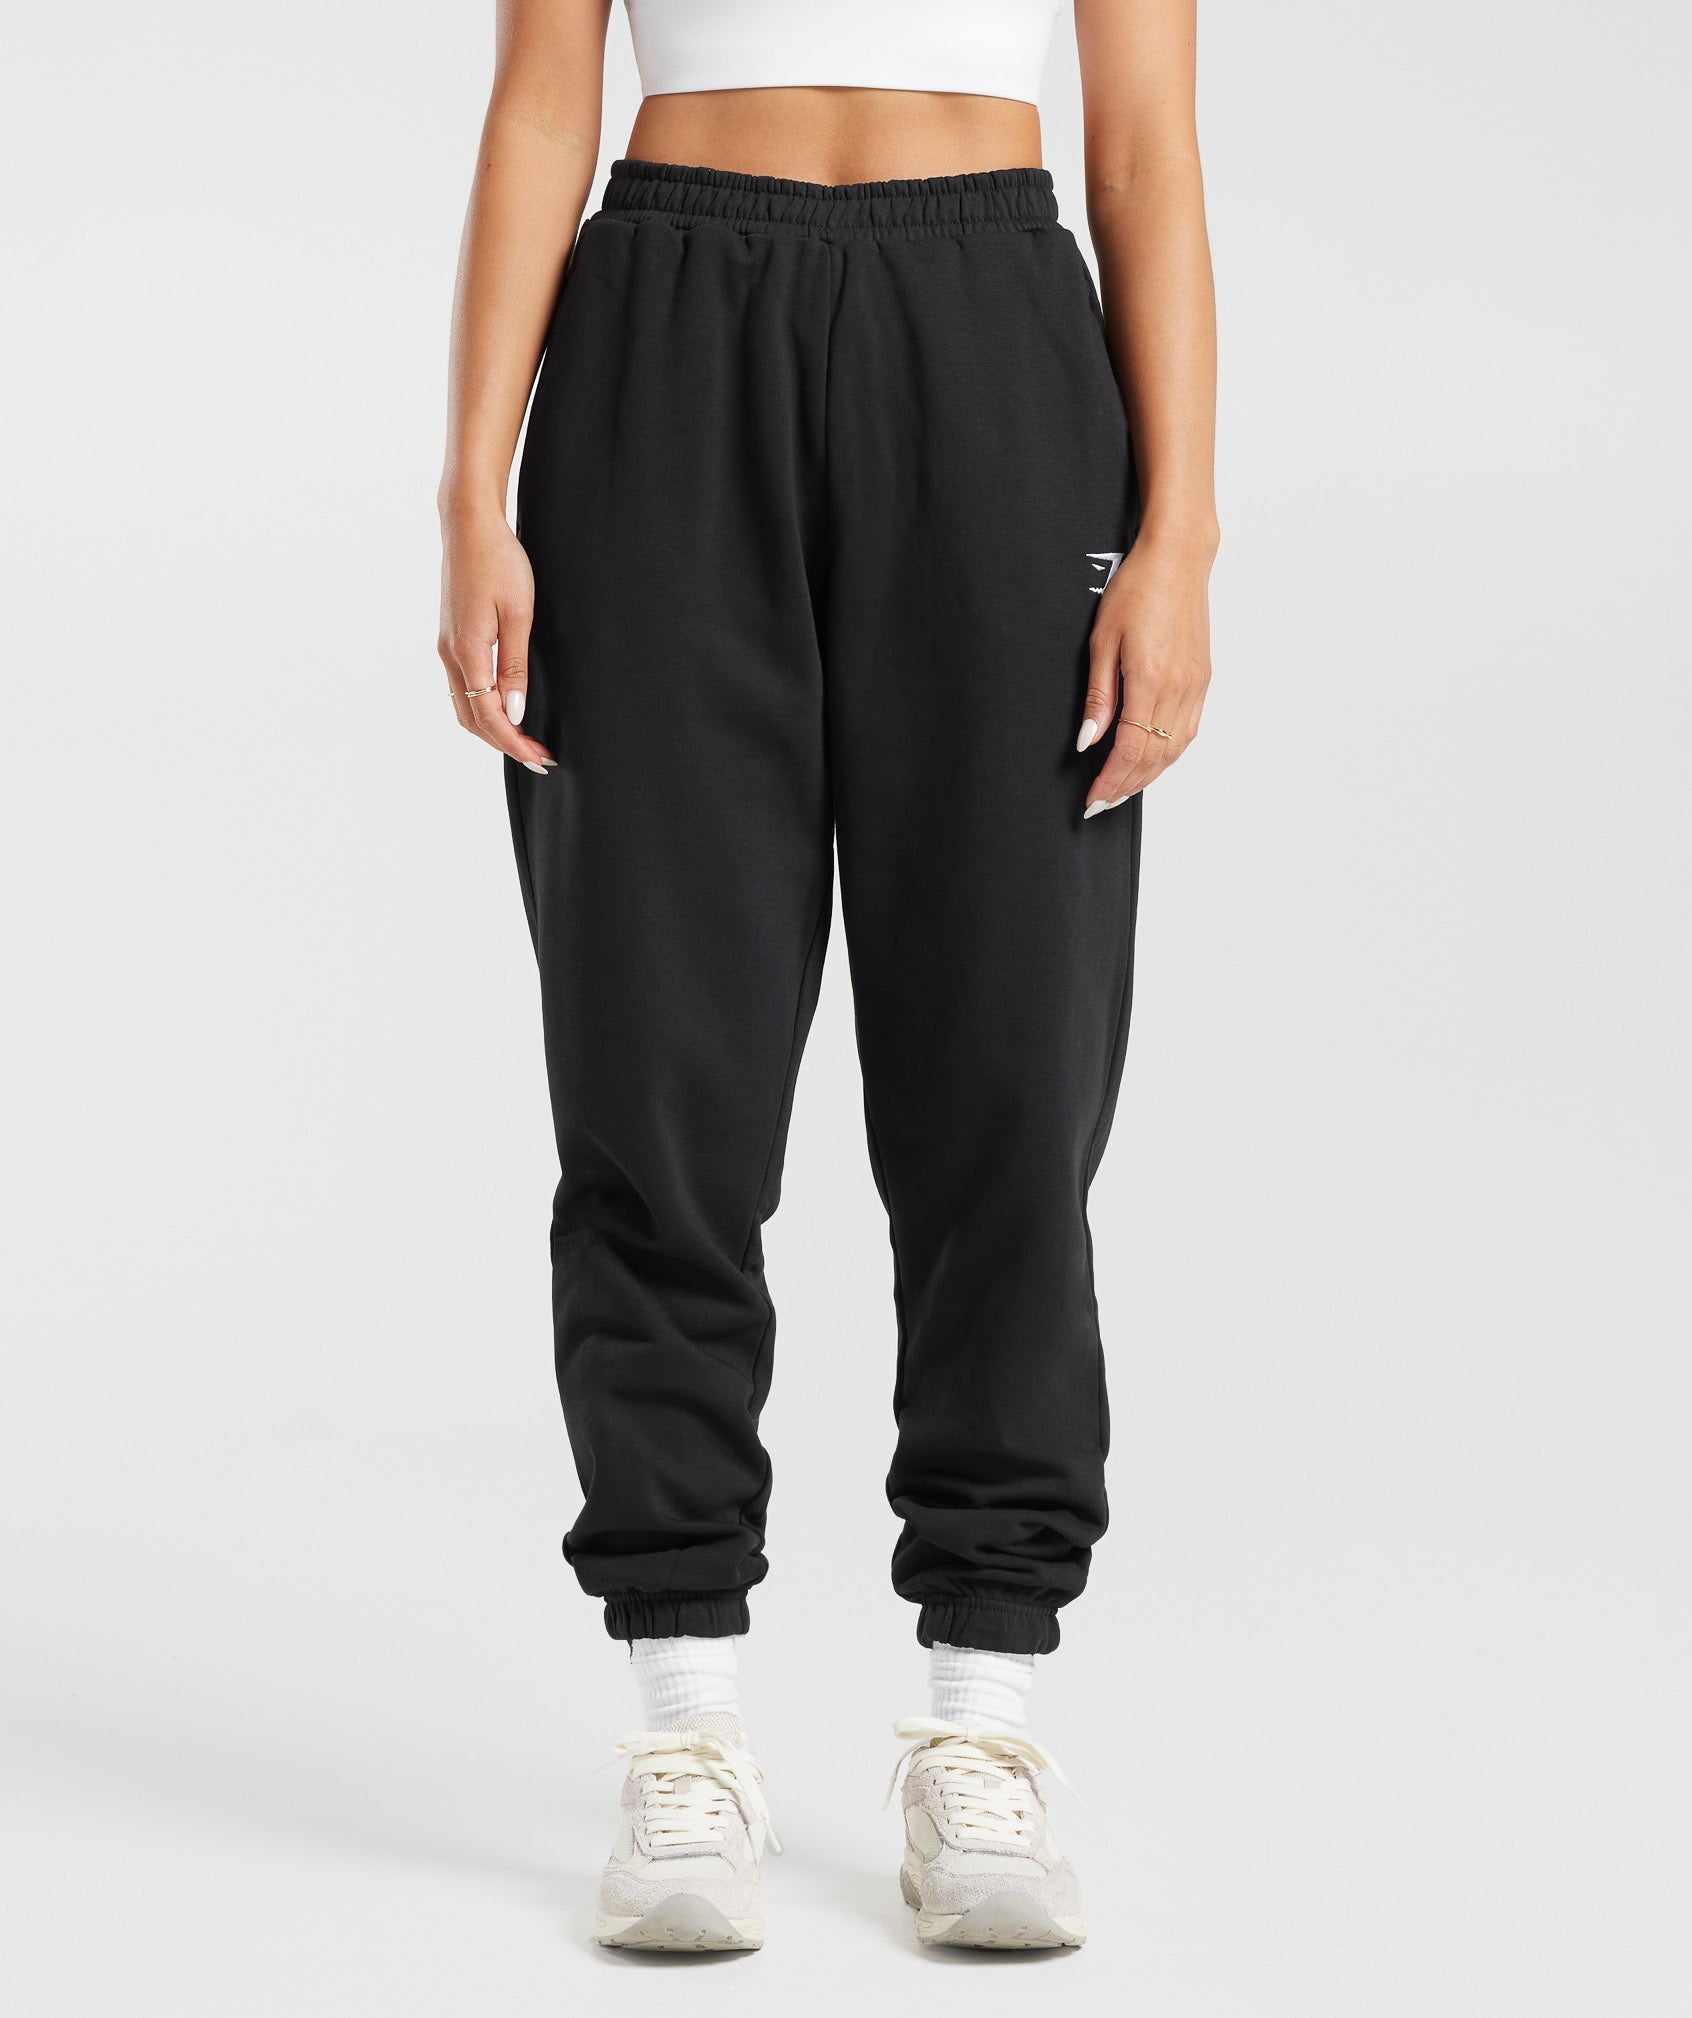 Matching Sweatsuits For Women, Tracksuits